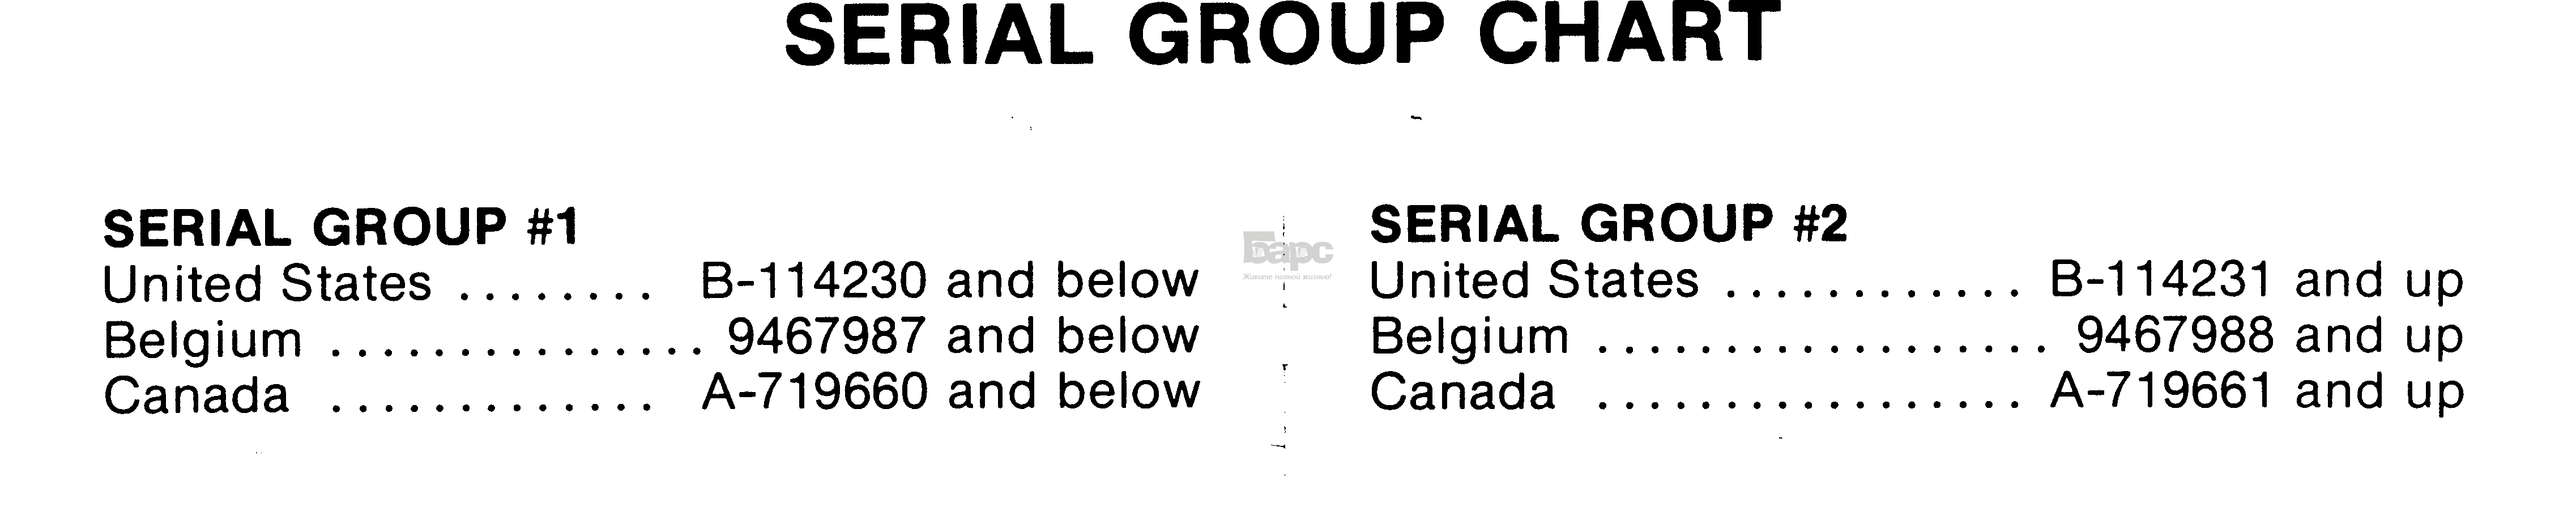 MISC. PARTS / SERIAL GROUP CHART